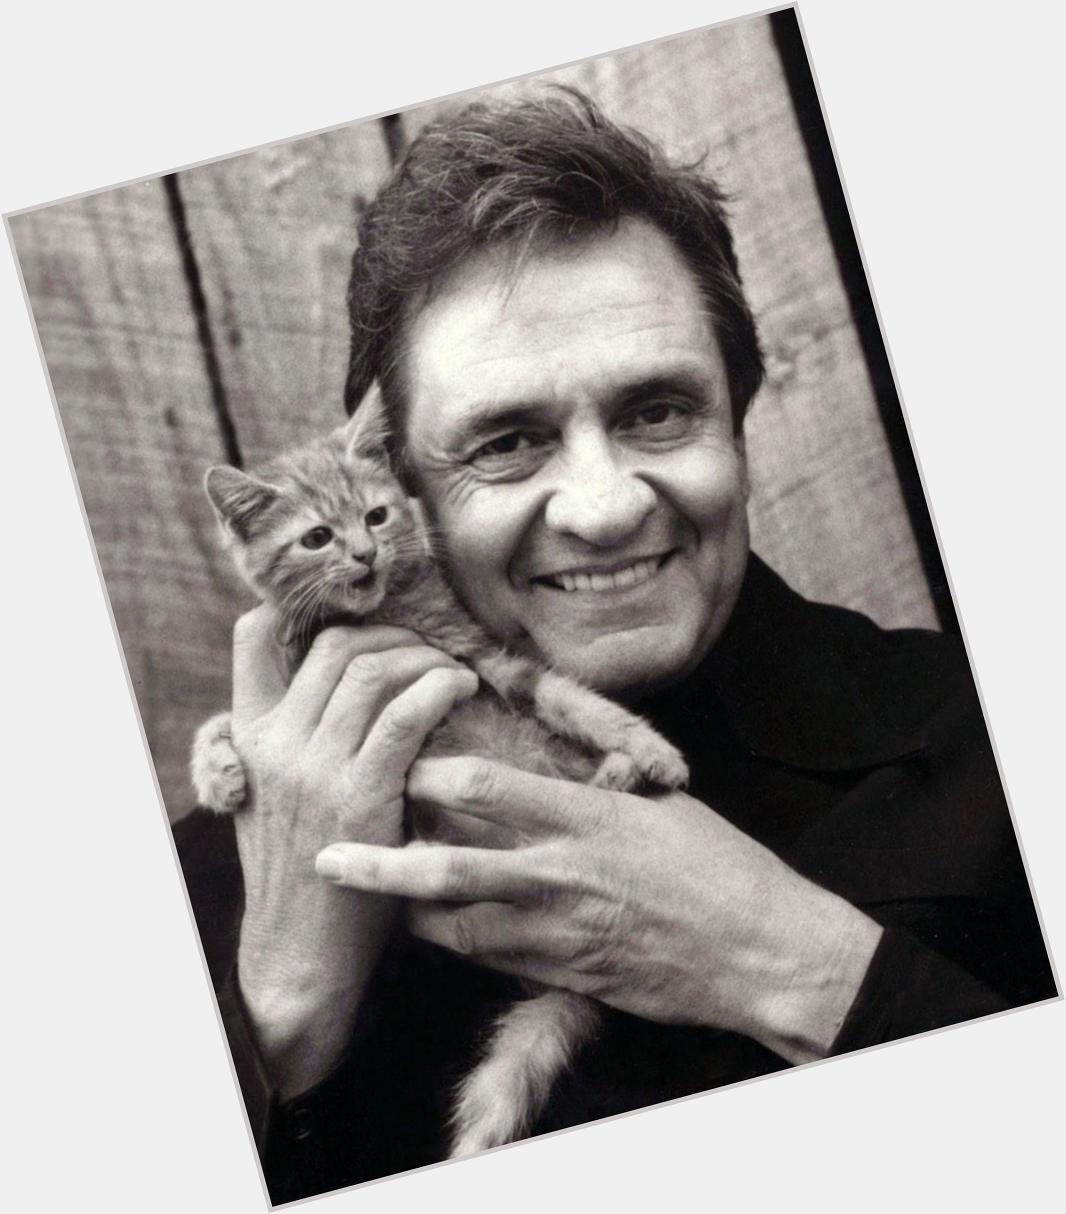 Happy birthday Johnny cash!!! Excuse to play more cash at blues kitchen camden friday and slim Jims on Saturday now! 